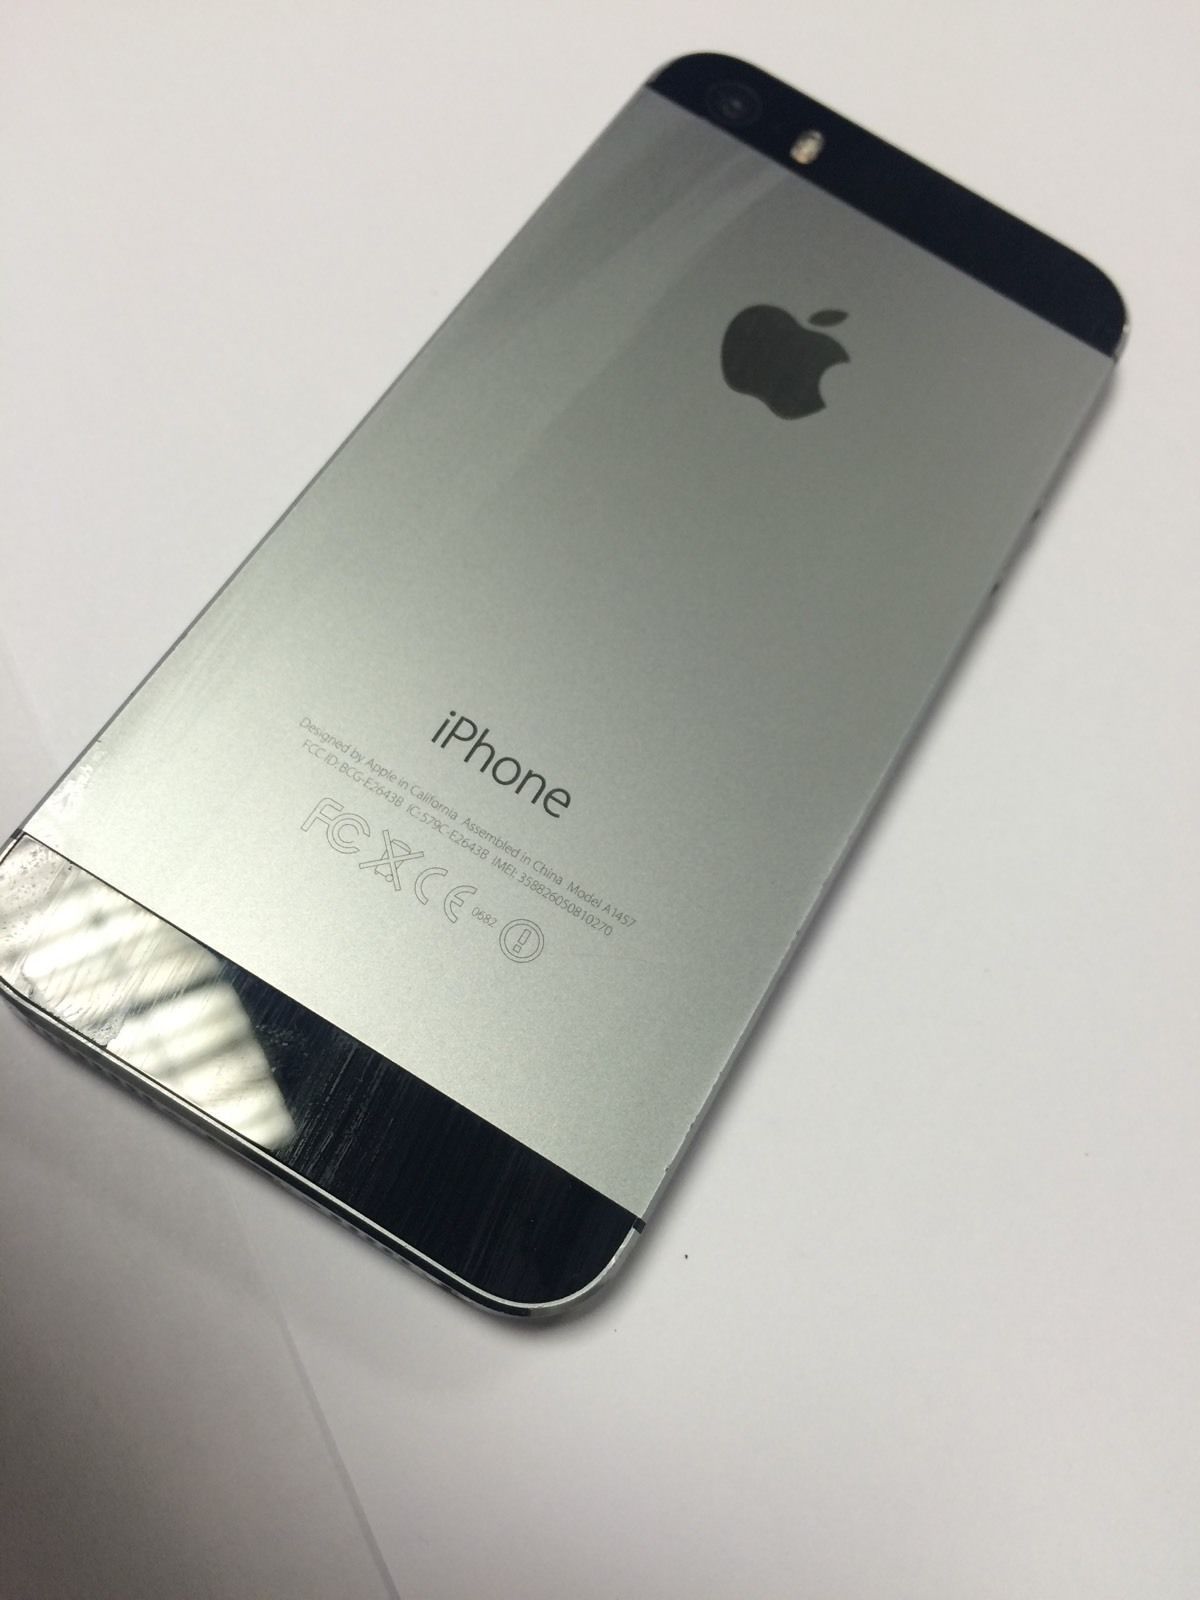 Apple iPhone 5s - 32 GB - Space Grey (Unlocked)- GOOD CONDITION ...